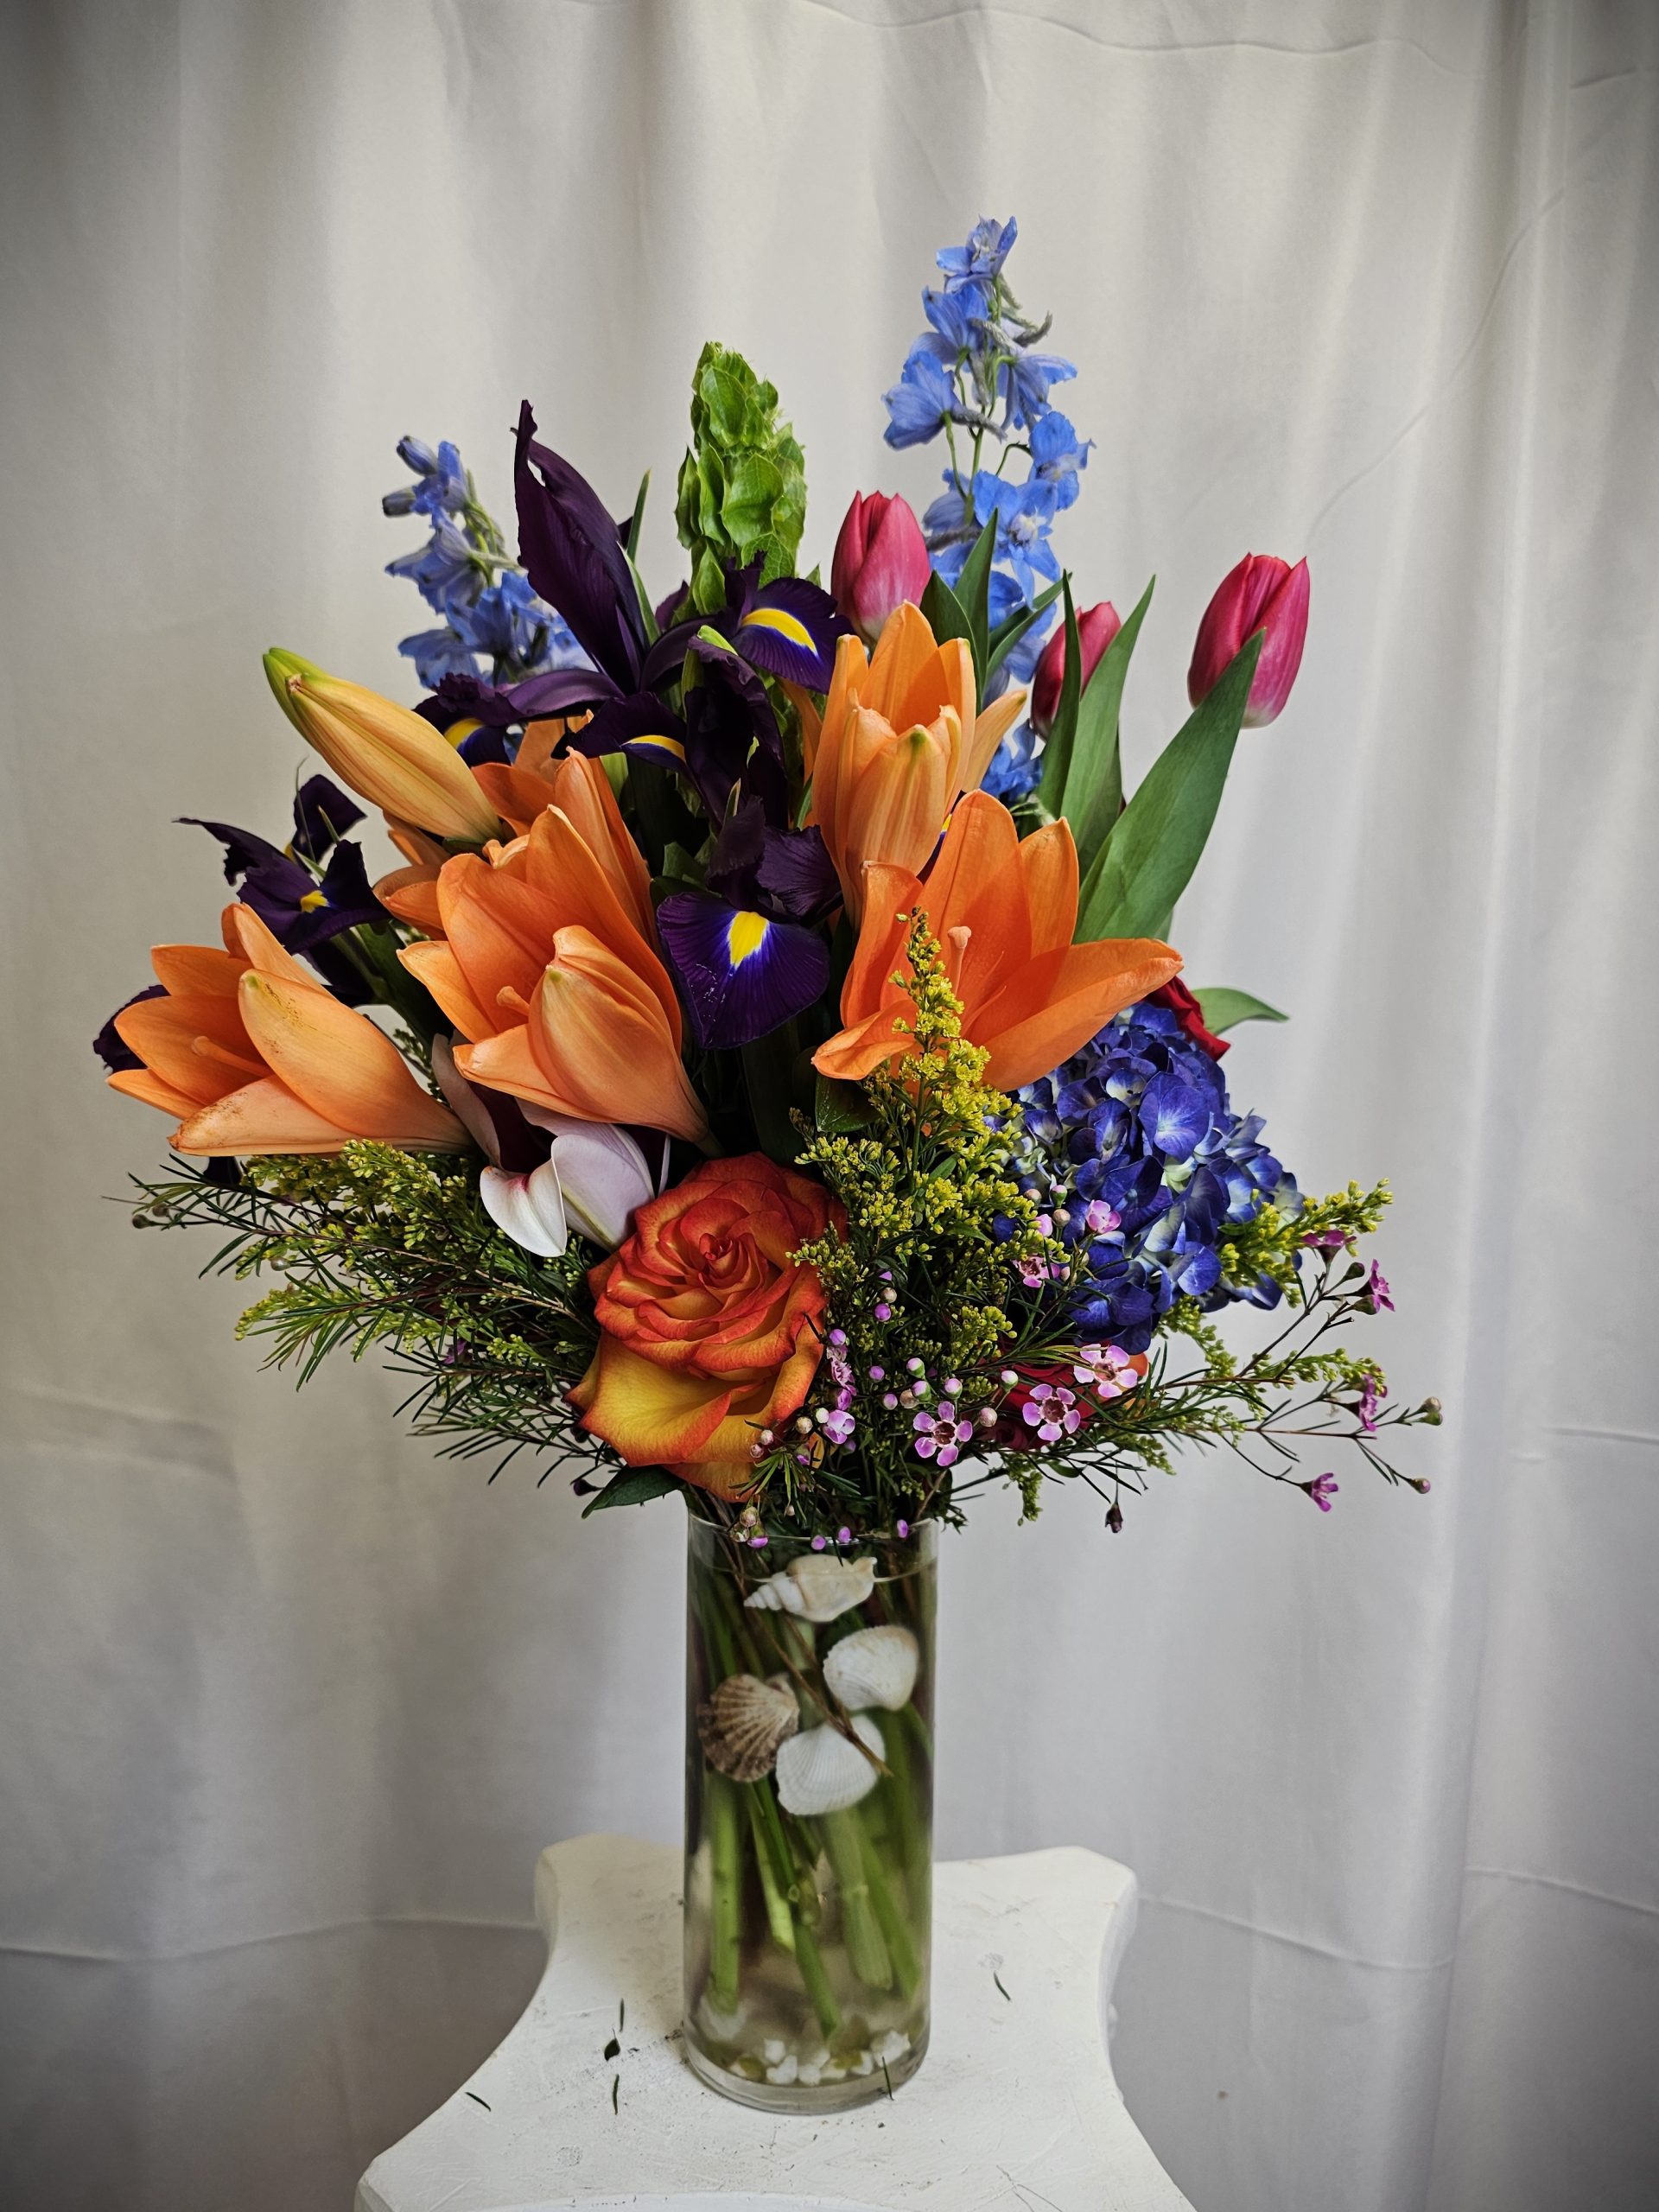 A vibrant bouquet of Orange Tulips and Purple Iris' arranged in a clear vase.